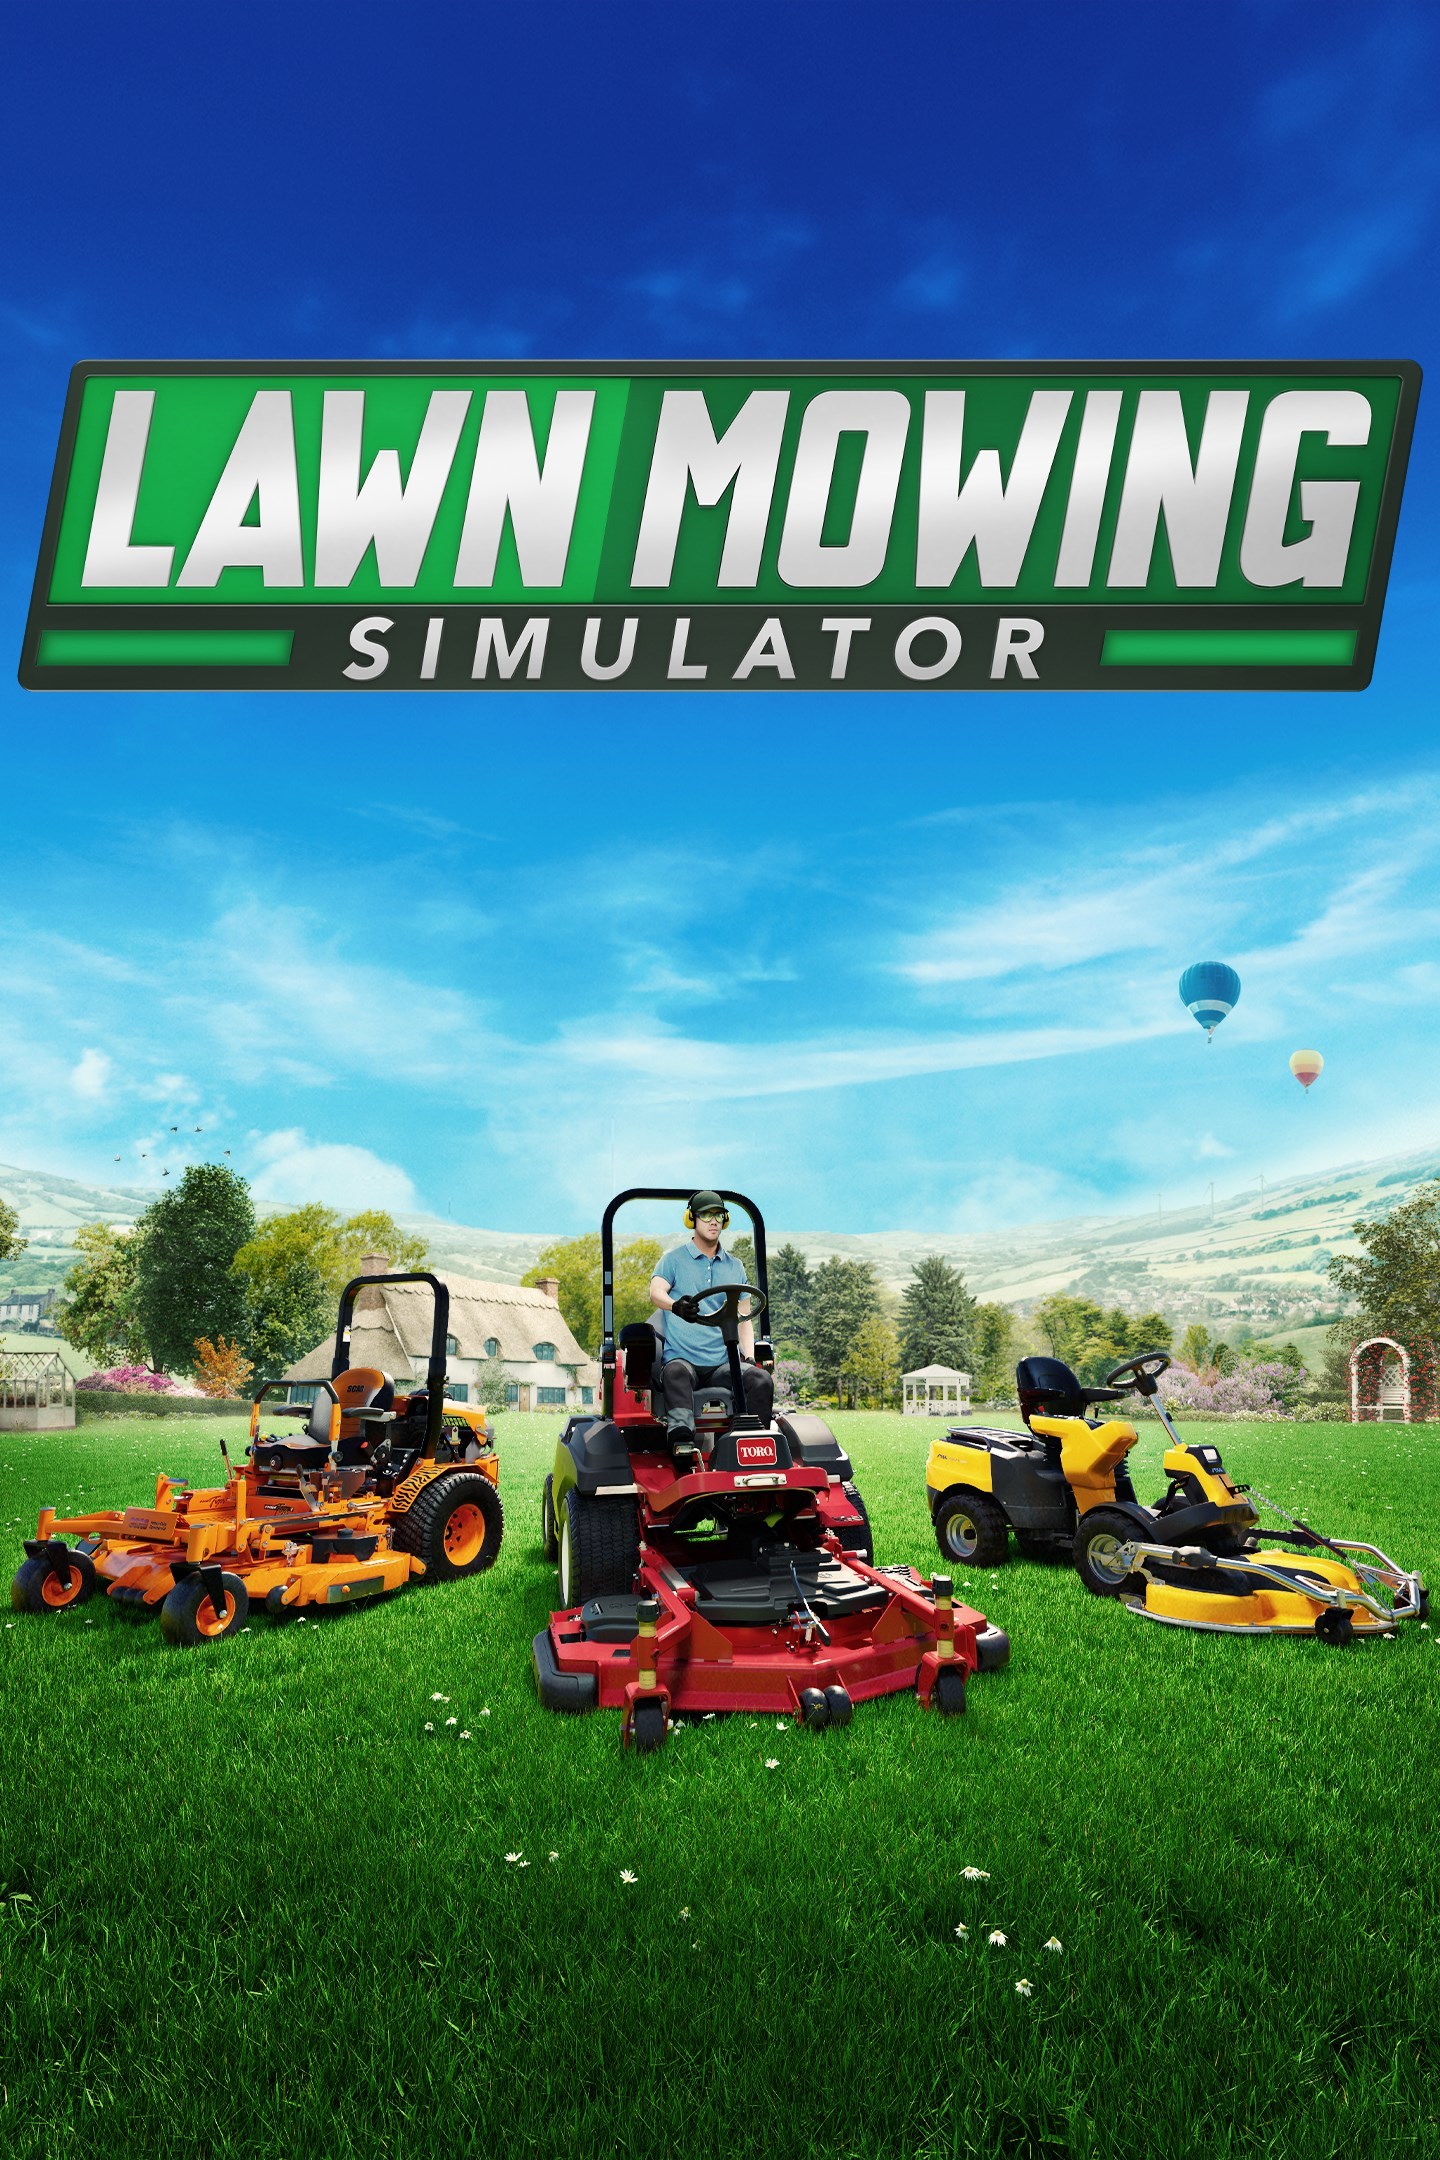 Lawn Mowing Simulator picture photo